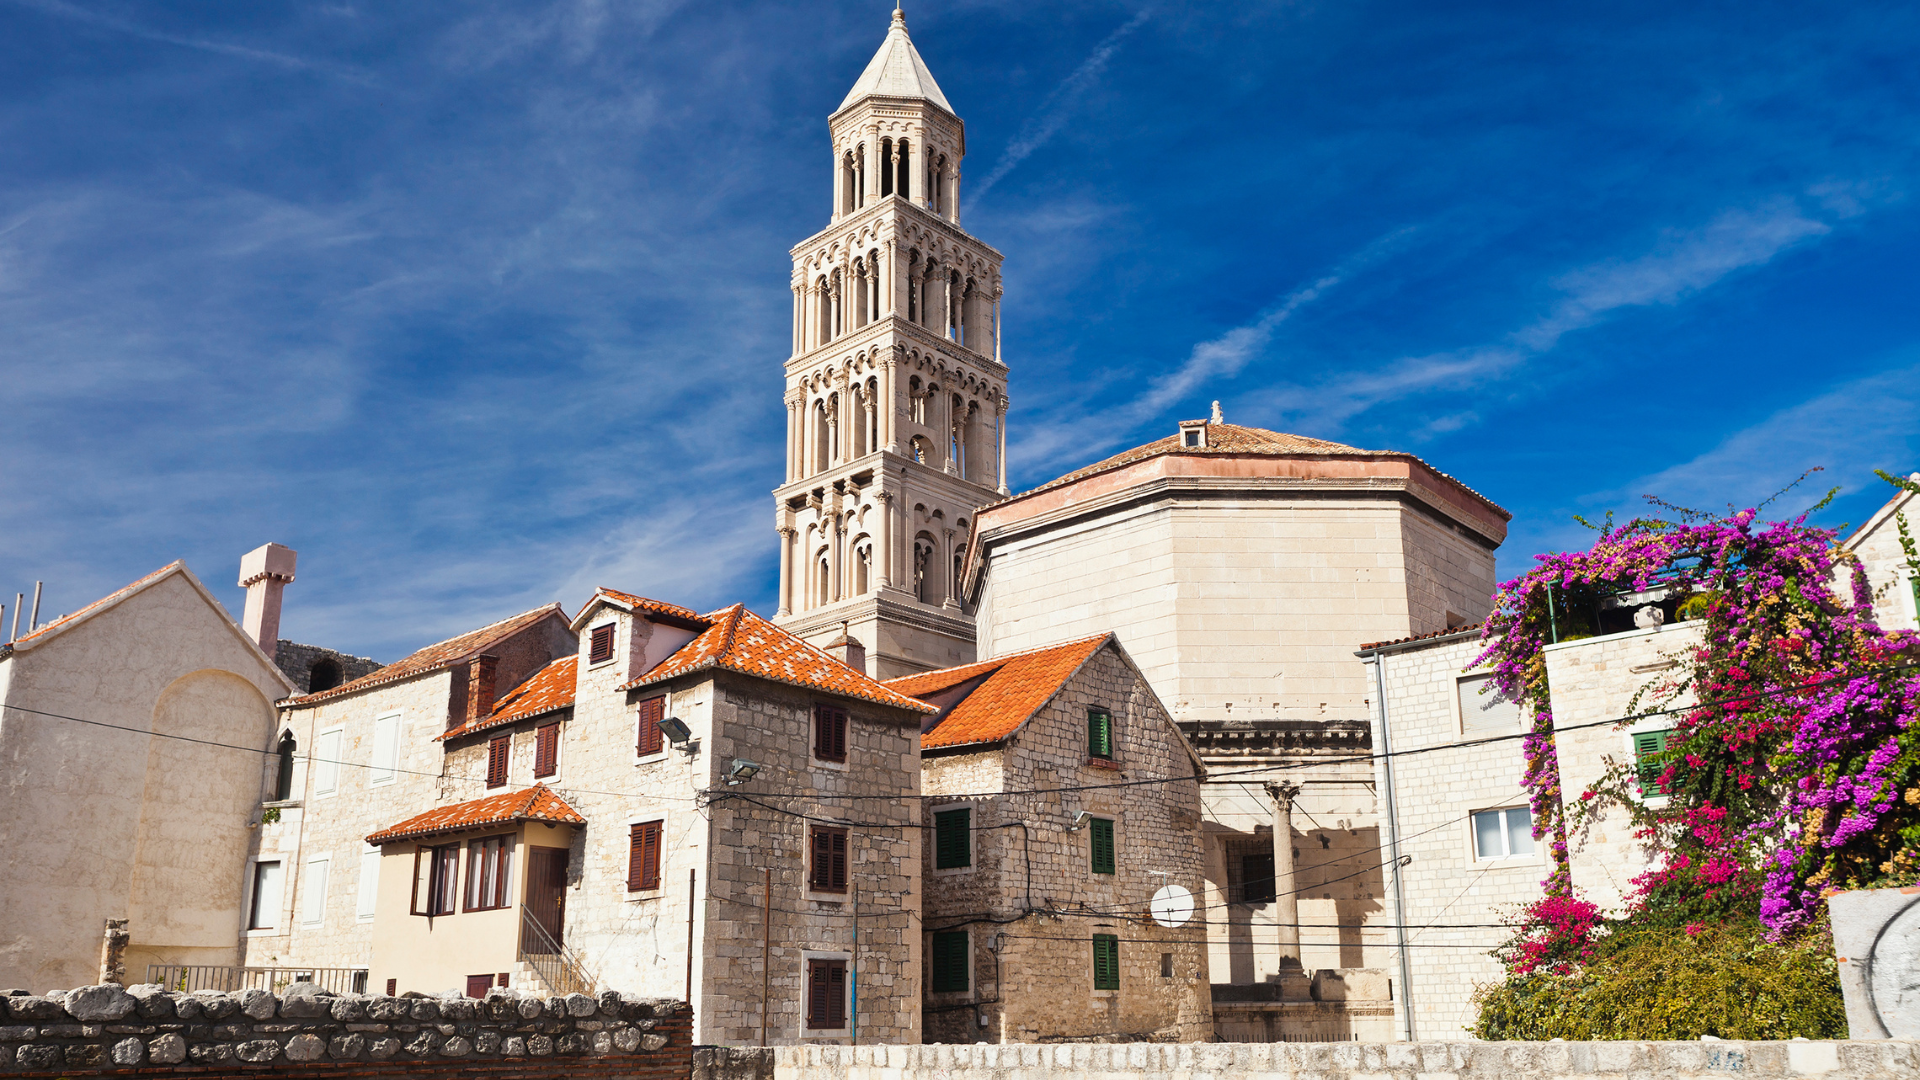 Ancient sites in one of the best cities to visit in Croatia